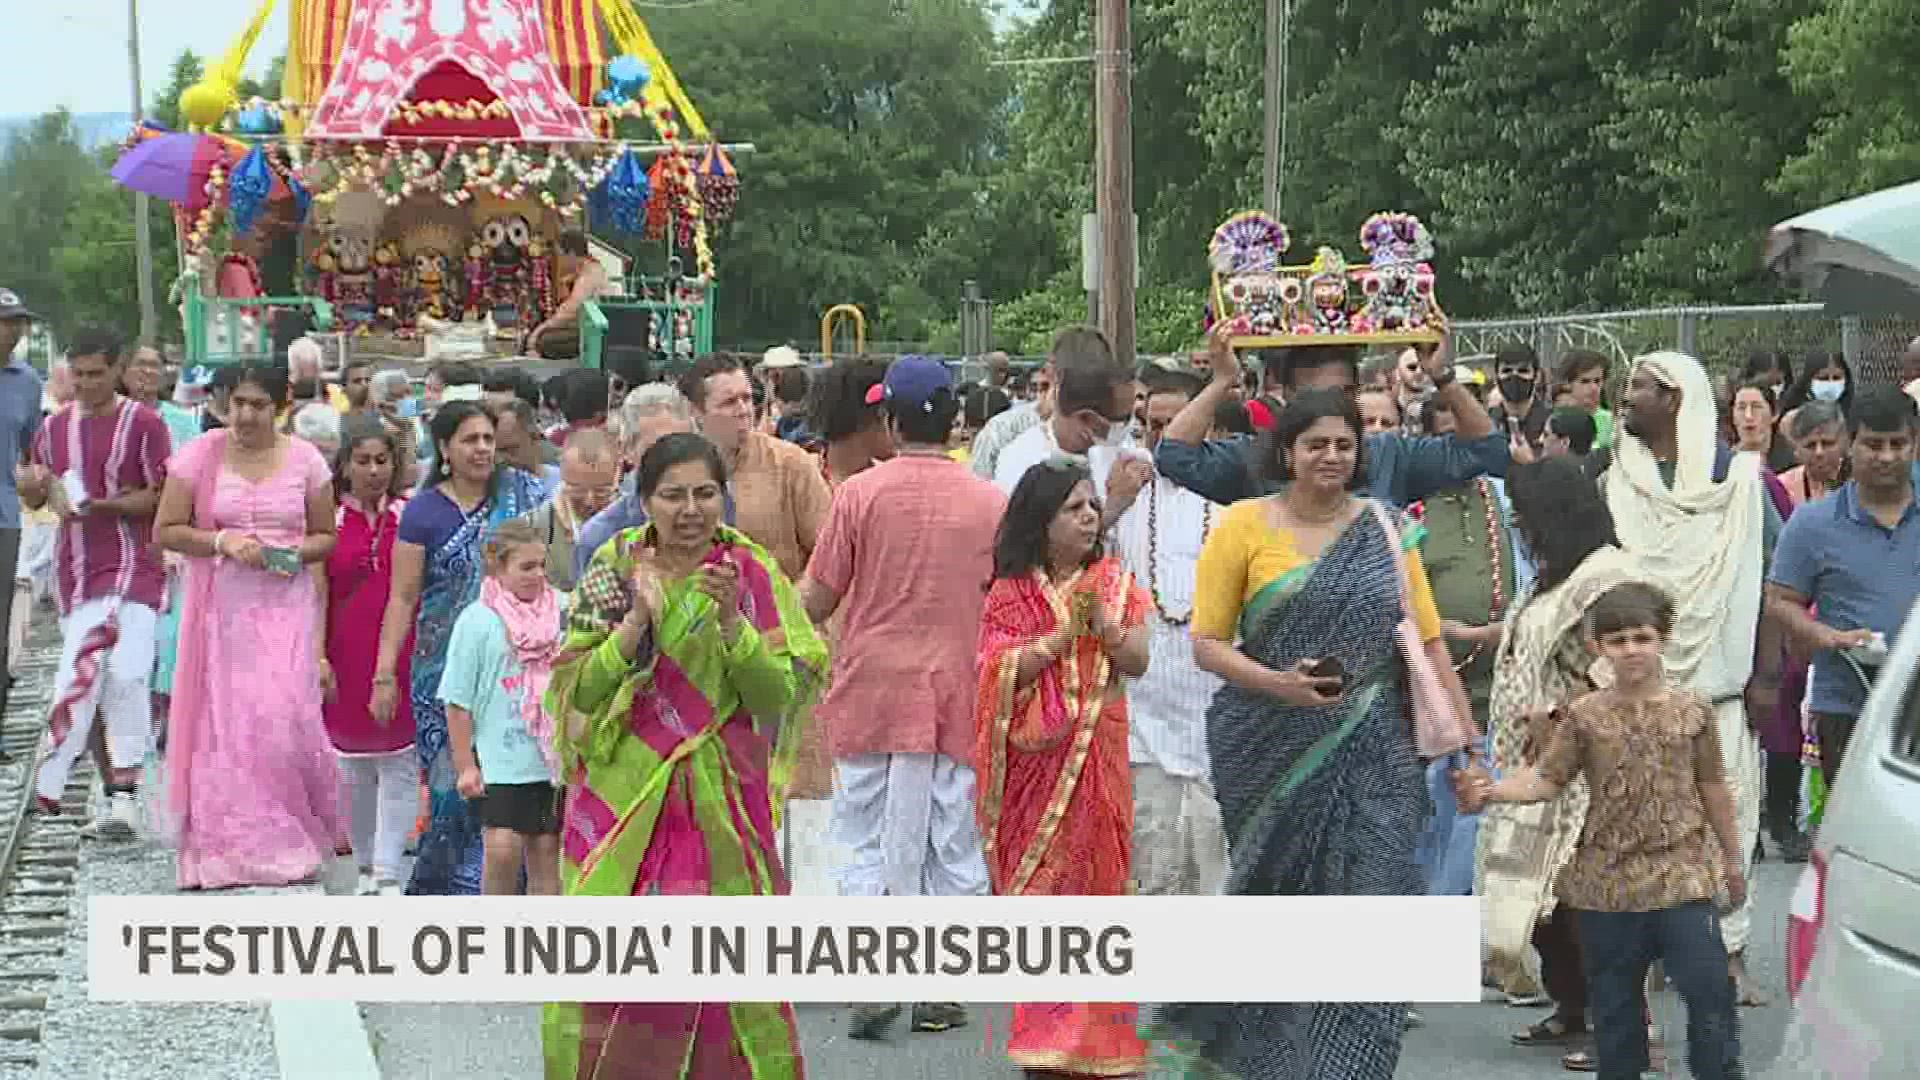 The 12th annual Hare Krishna Festival of India involved dancing, feasting and a two-hour procession of Deities.